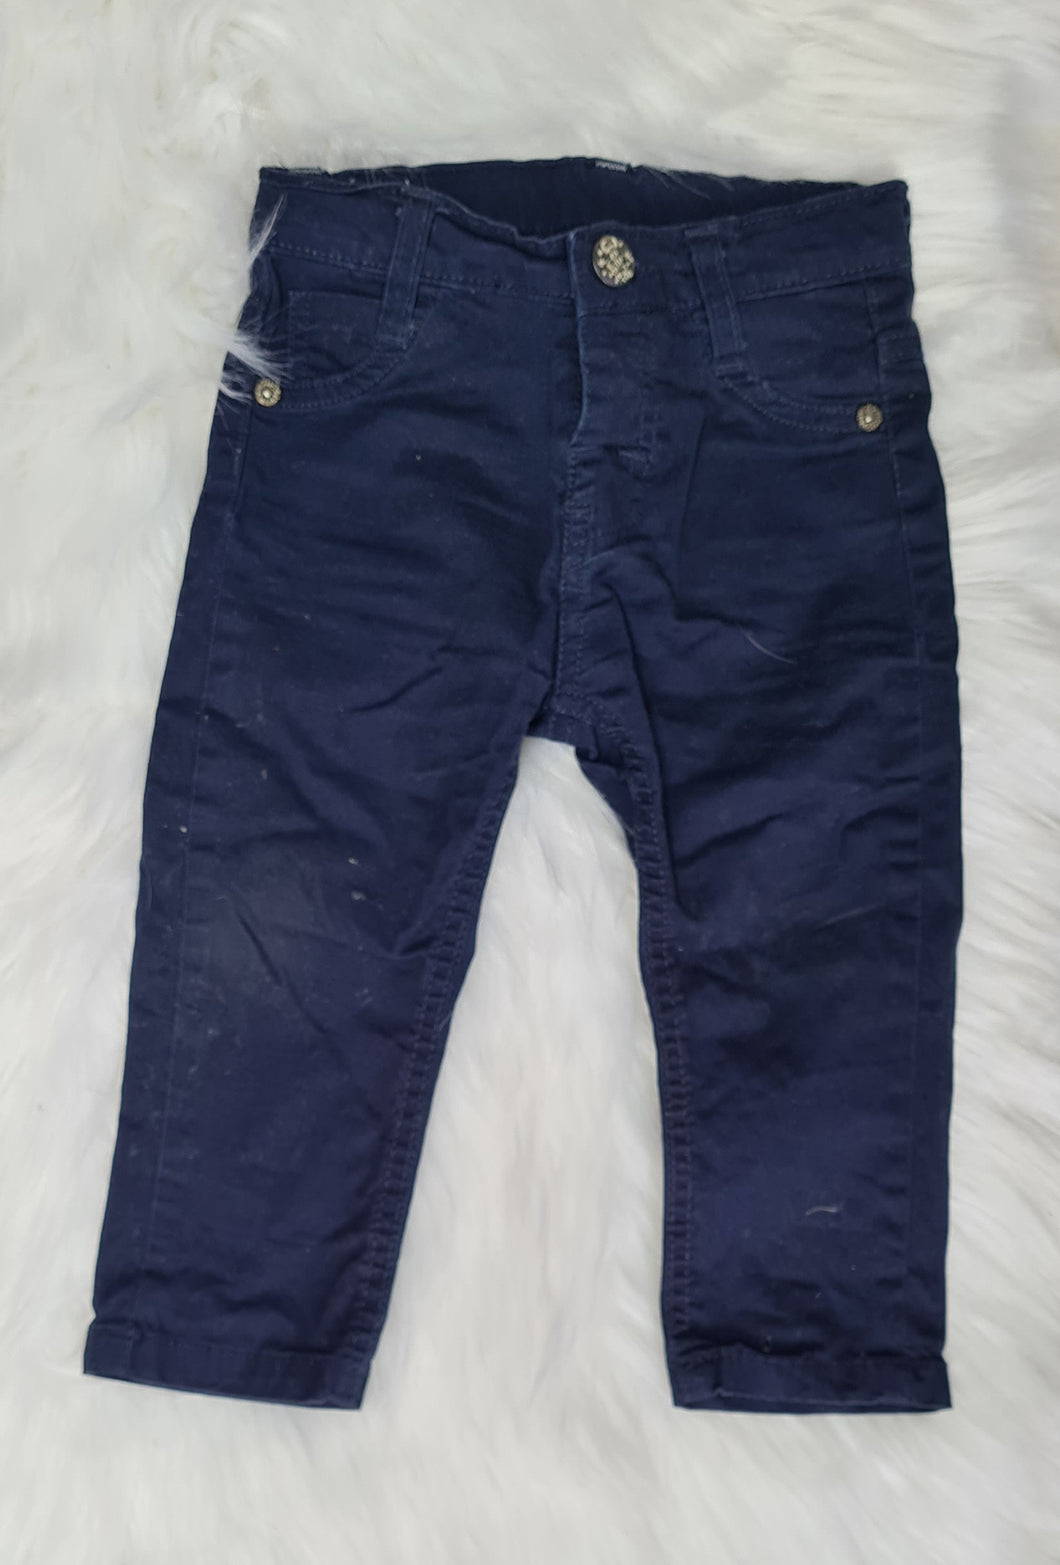 Boys 9-12 Months - Navy Blue Cargo Trousers